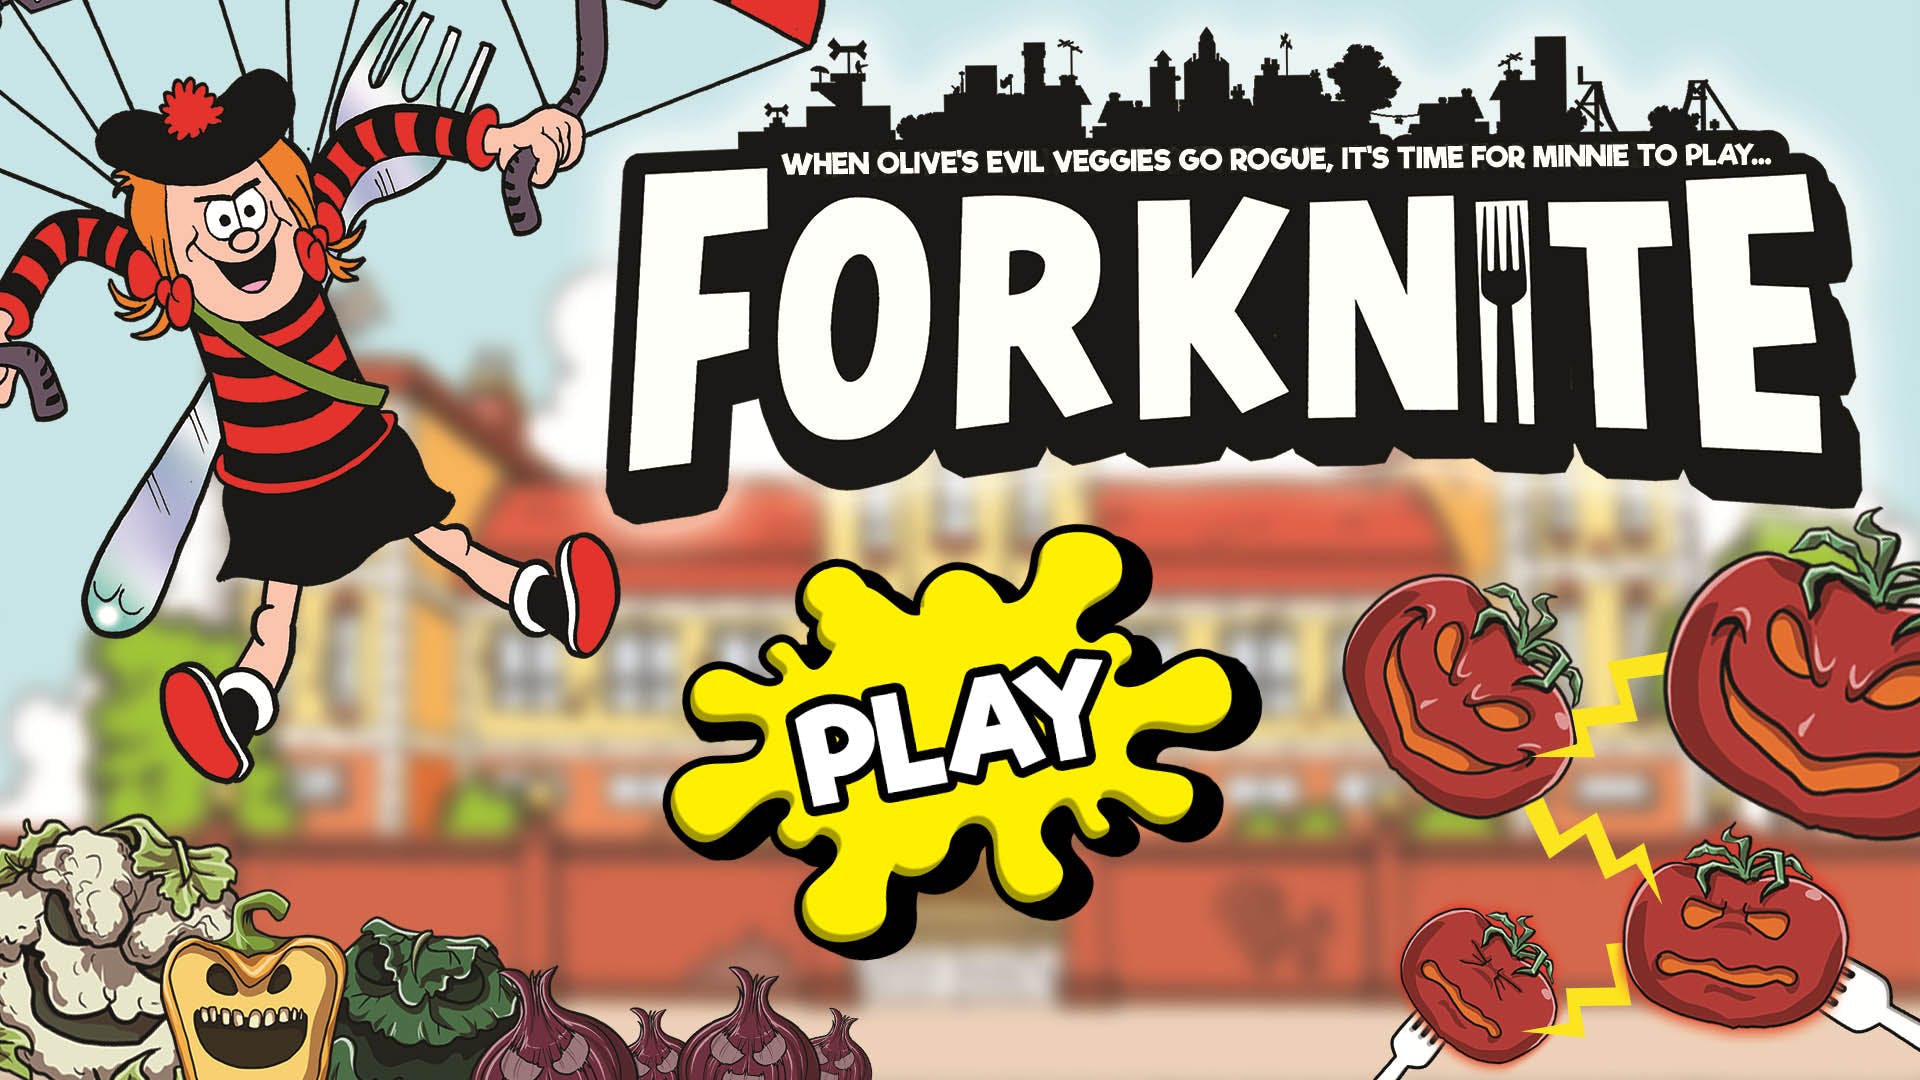 Play Forknite and Defeat the Veg!